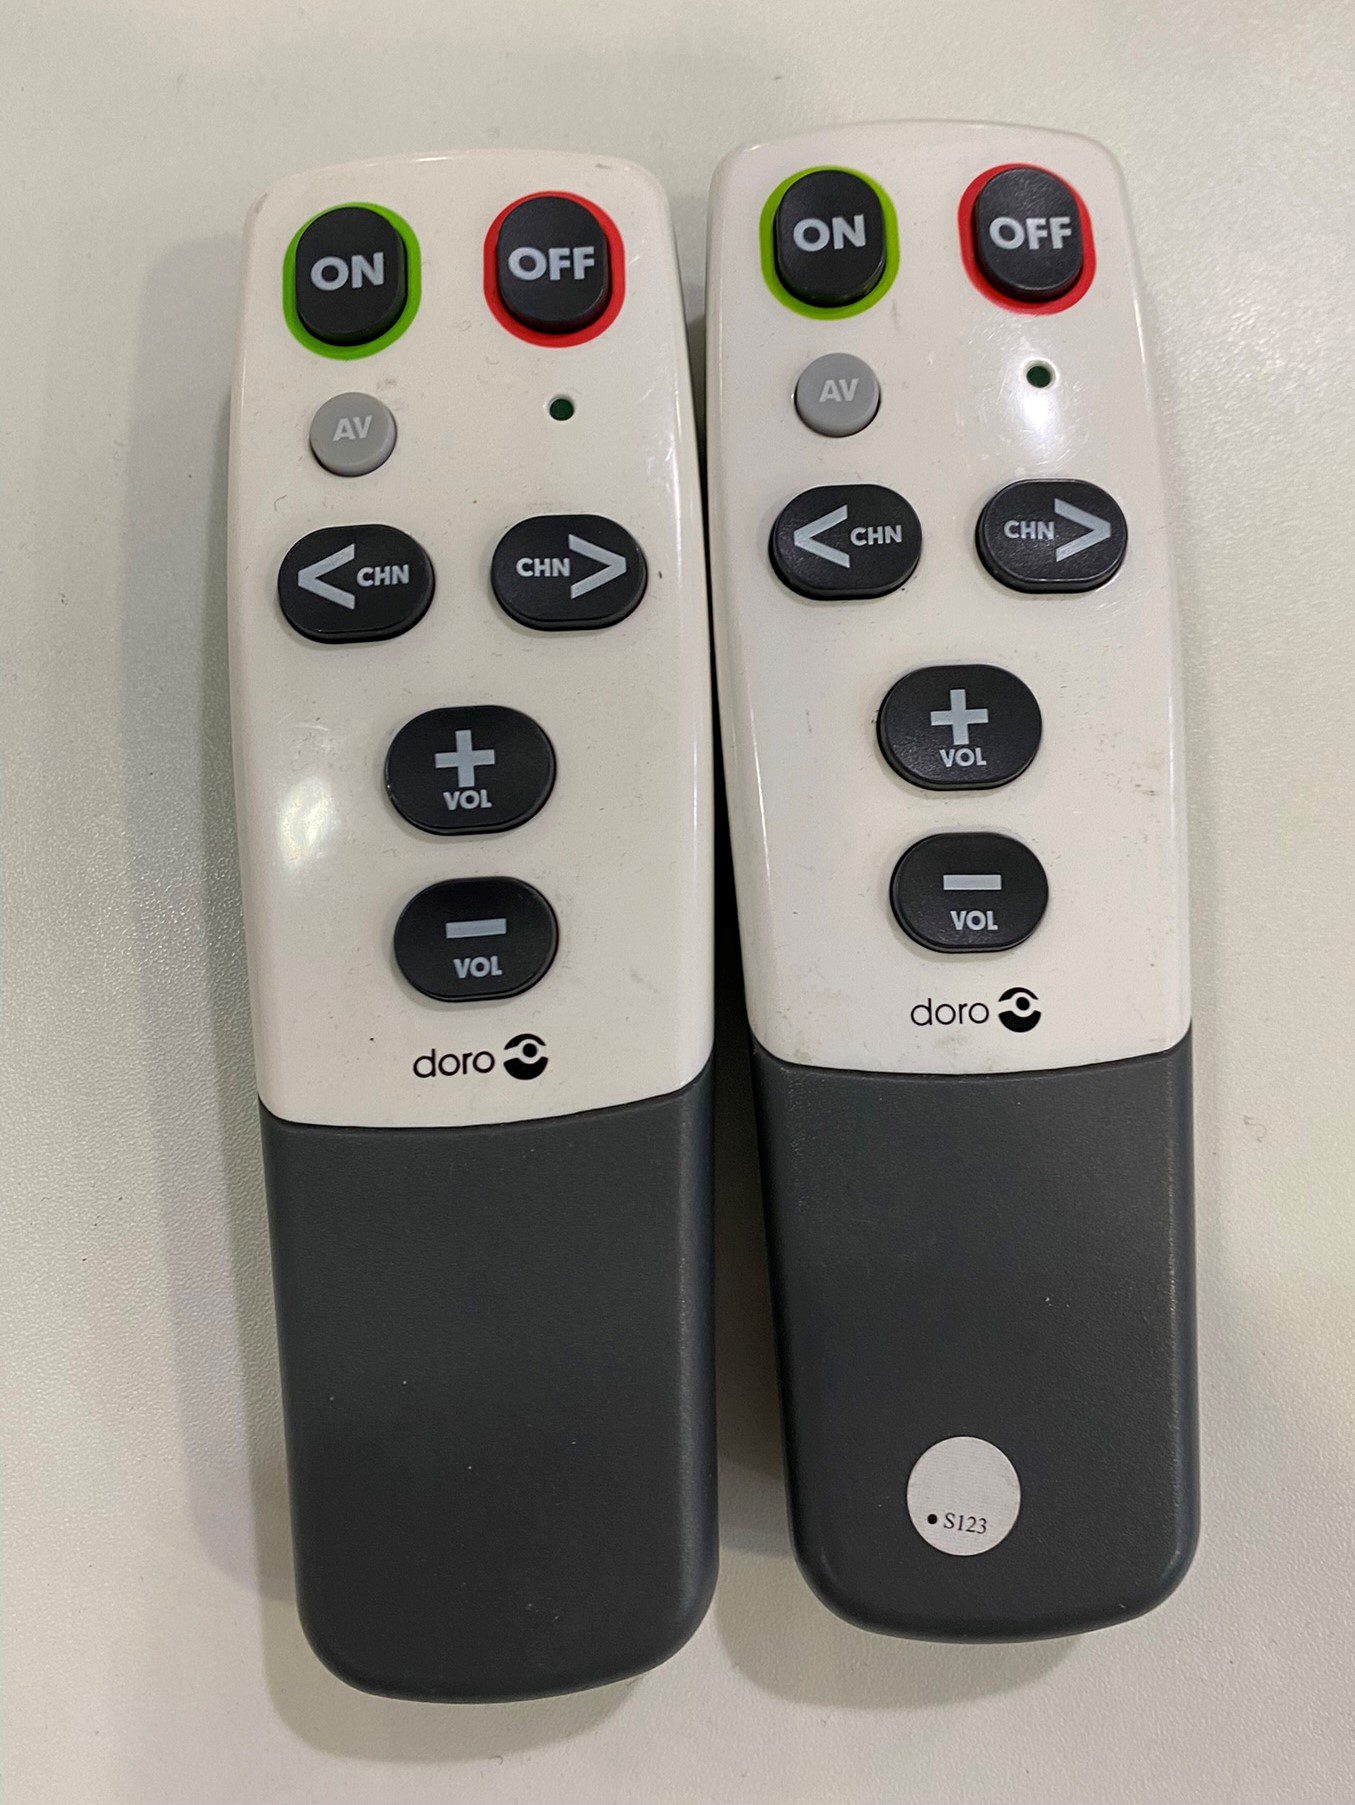 Large text simplified remote controls.